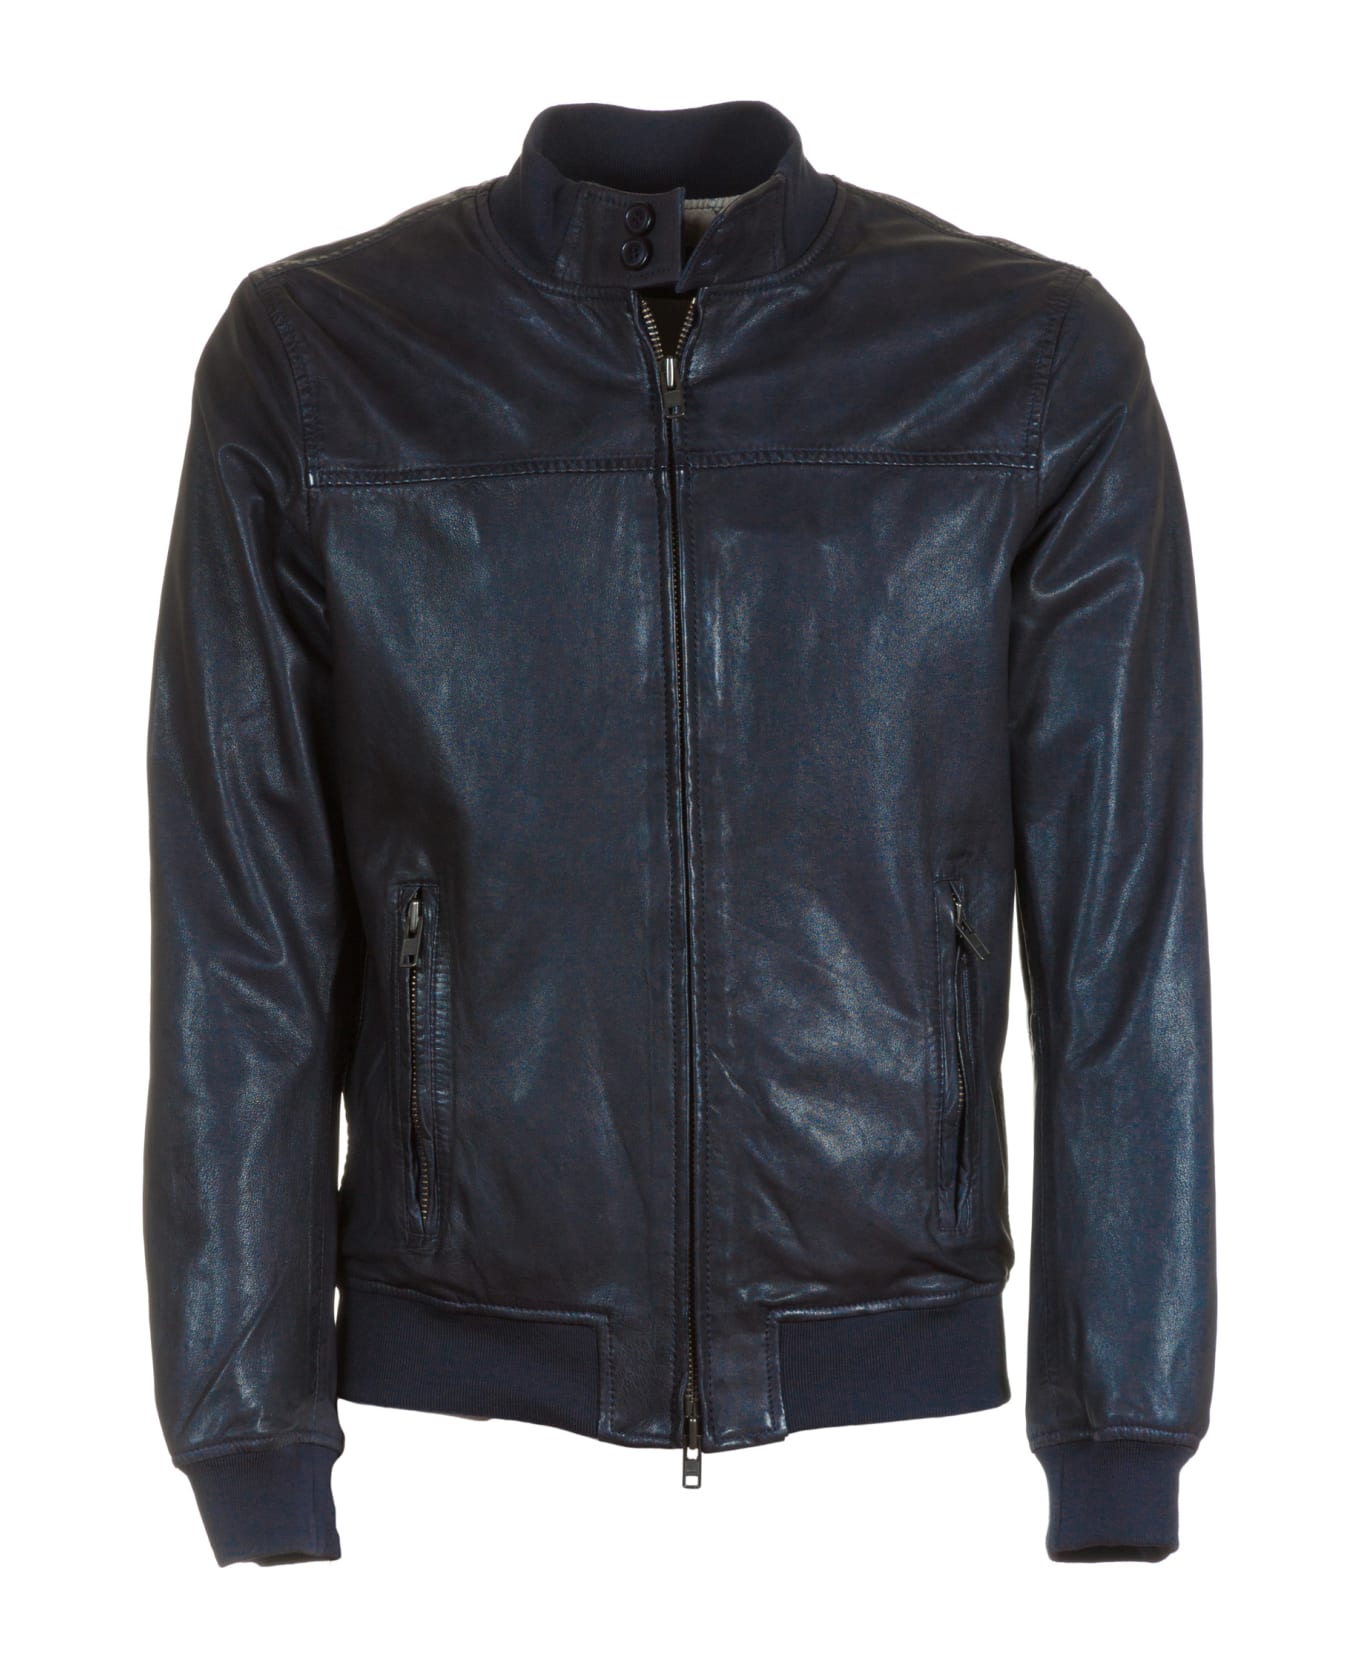 Bully Classic Leather Jacket | italist